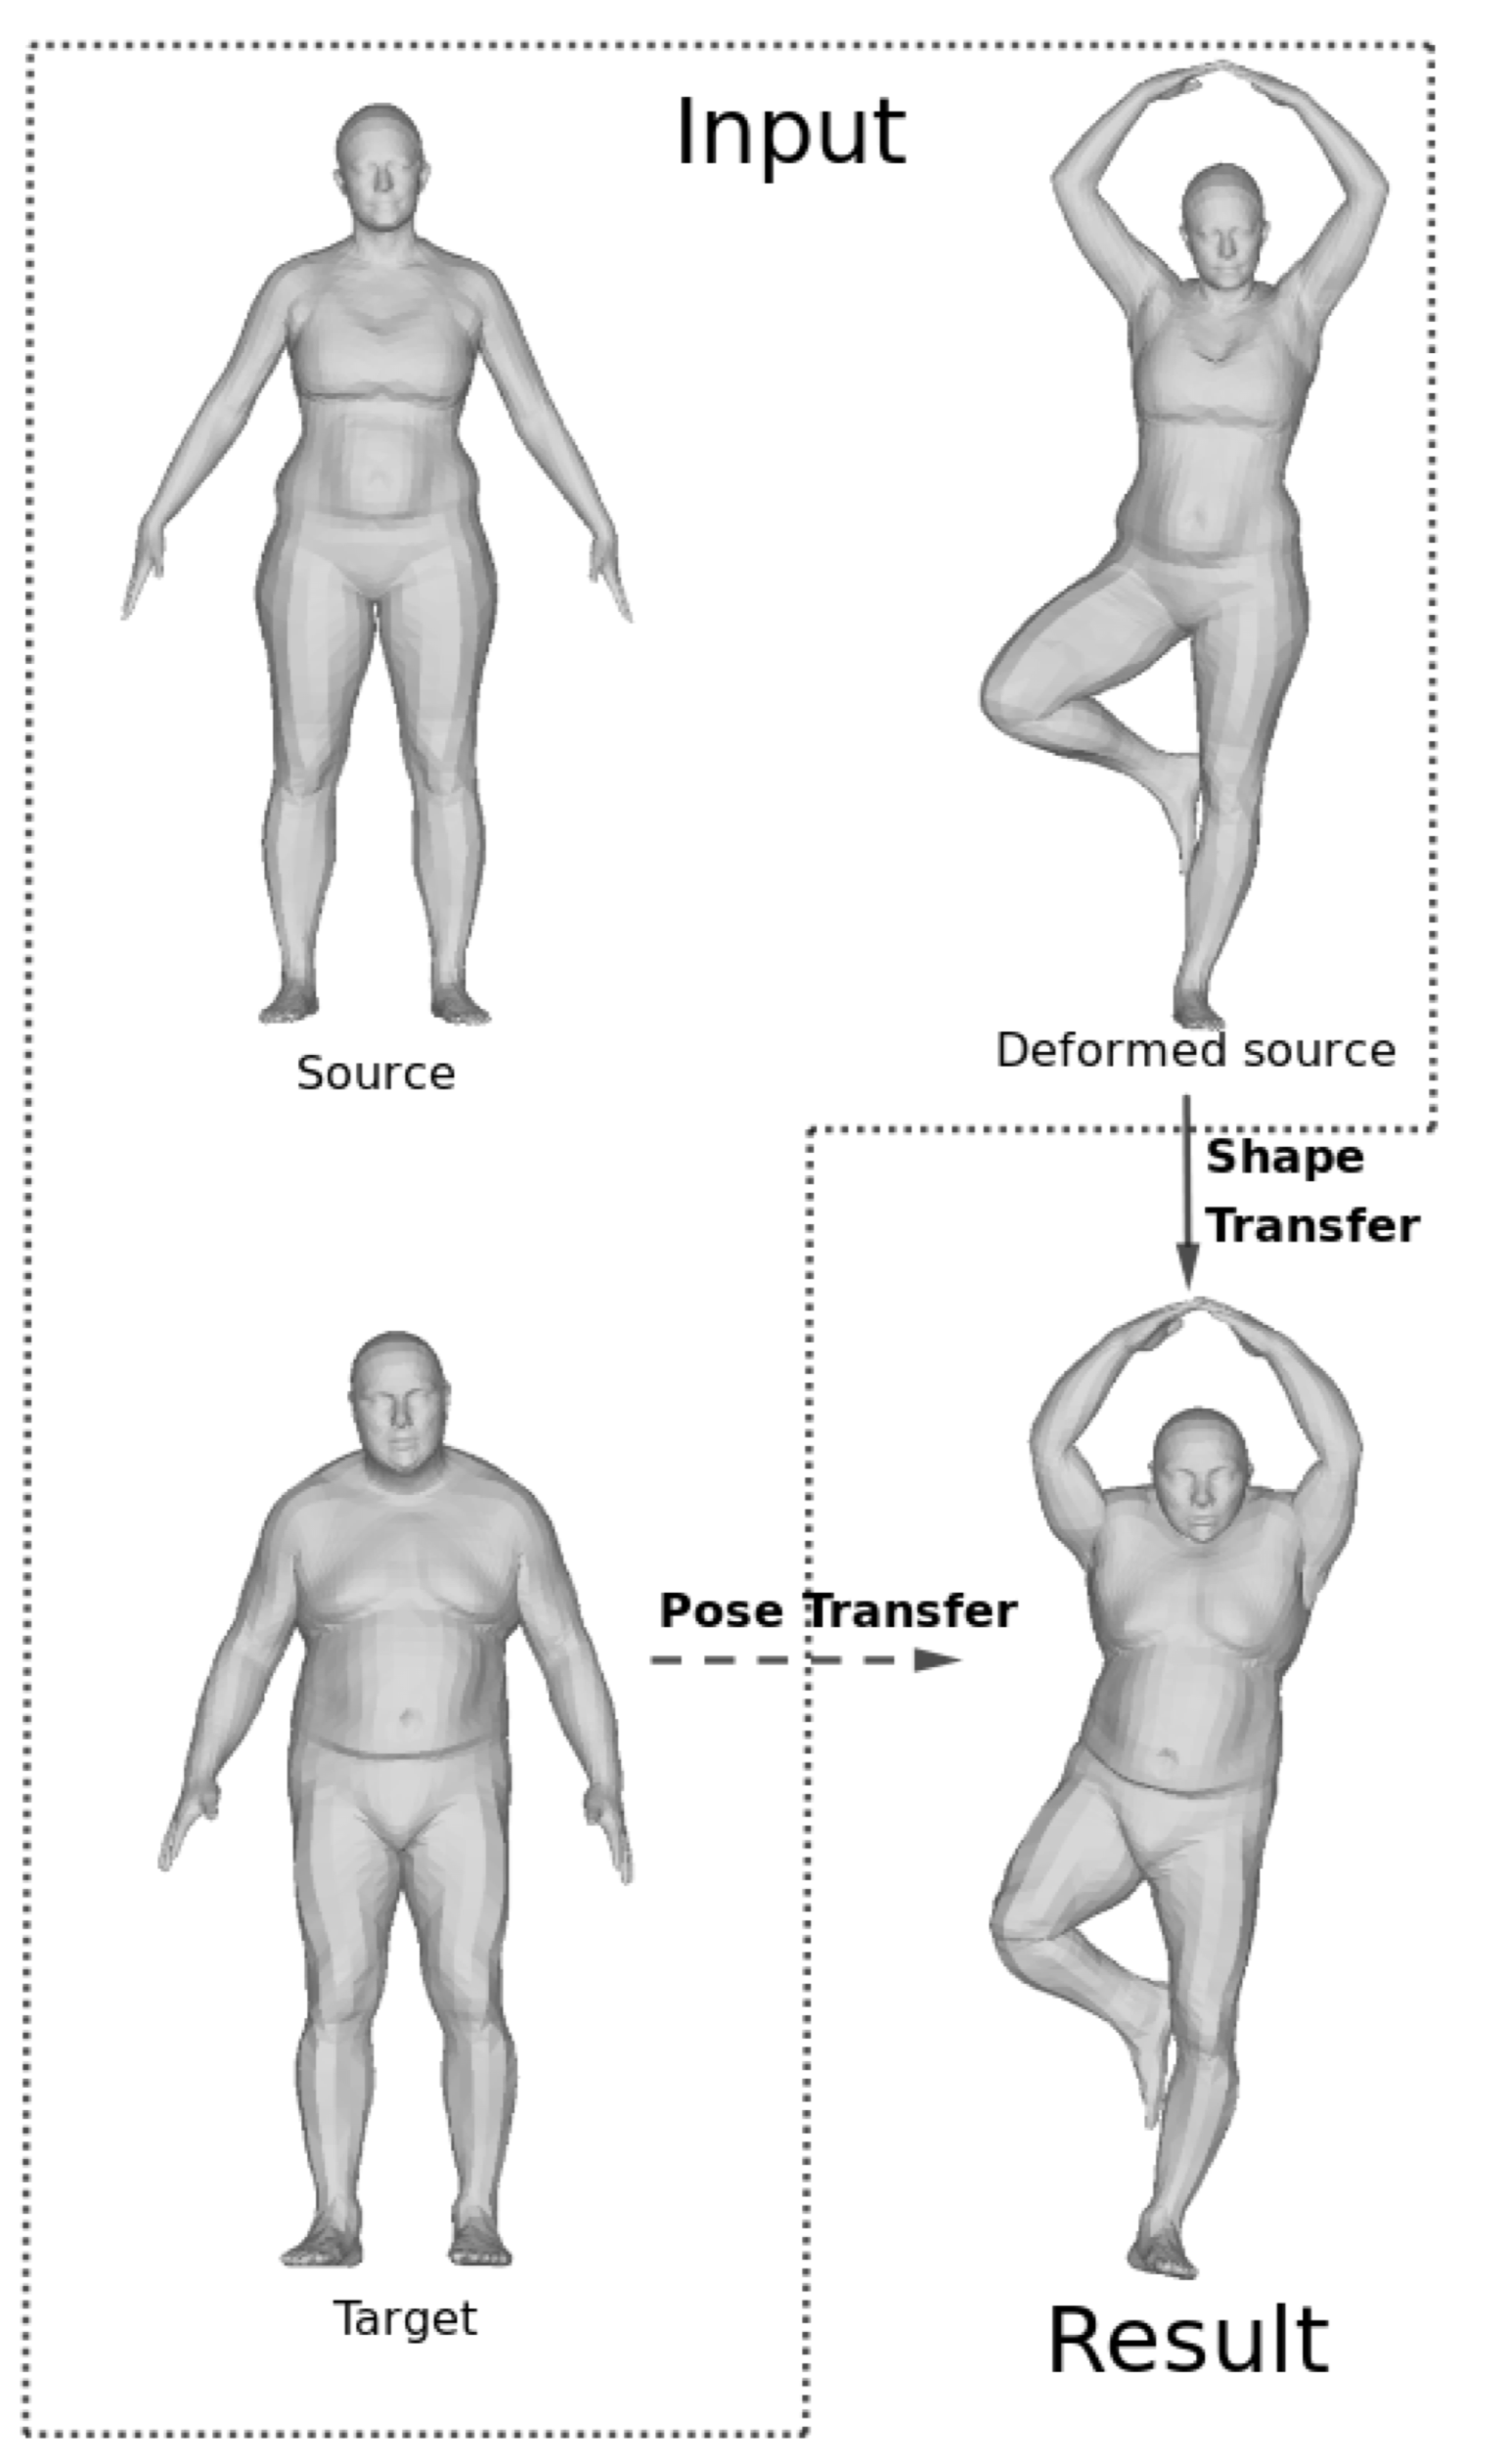 Motion Retargeting: Instead of transferring the pose from a source to a target shape, we propose to transfer the shape of the target to the deformed source character.